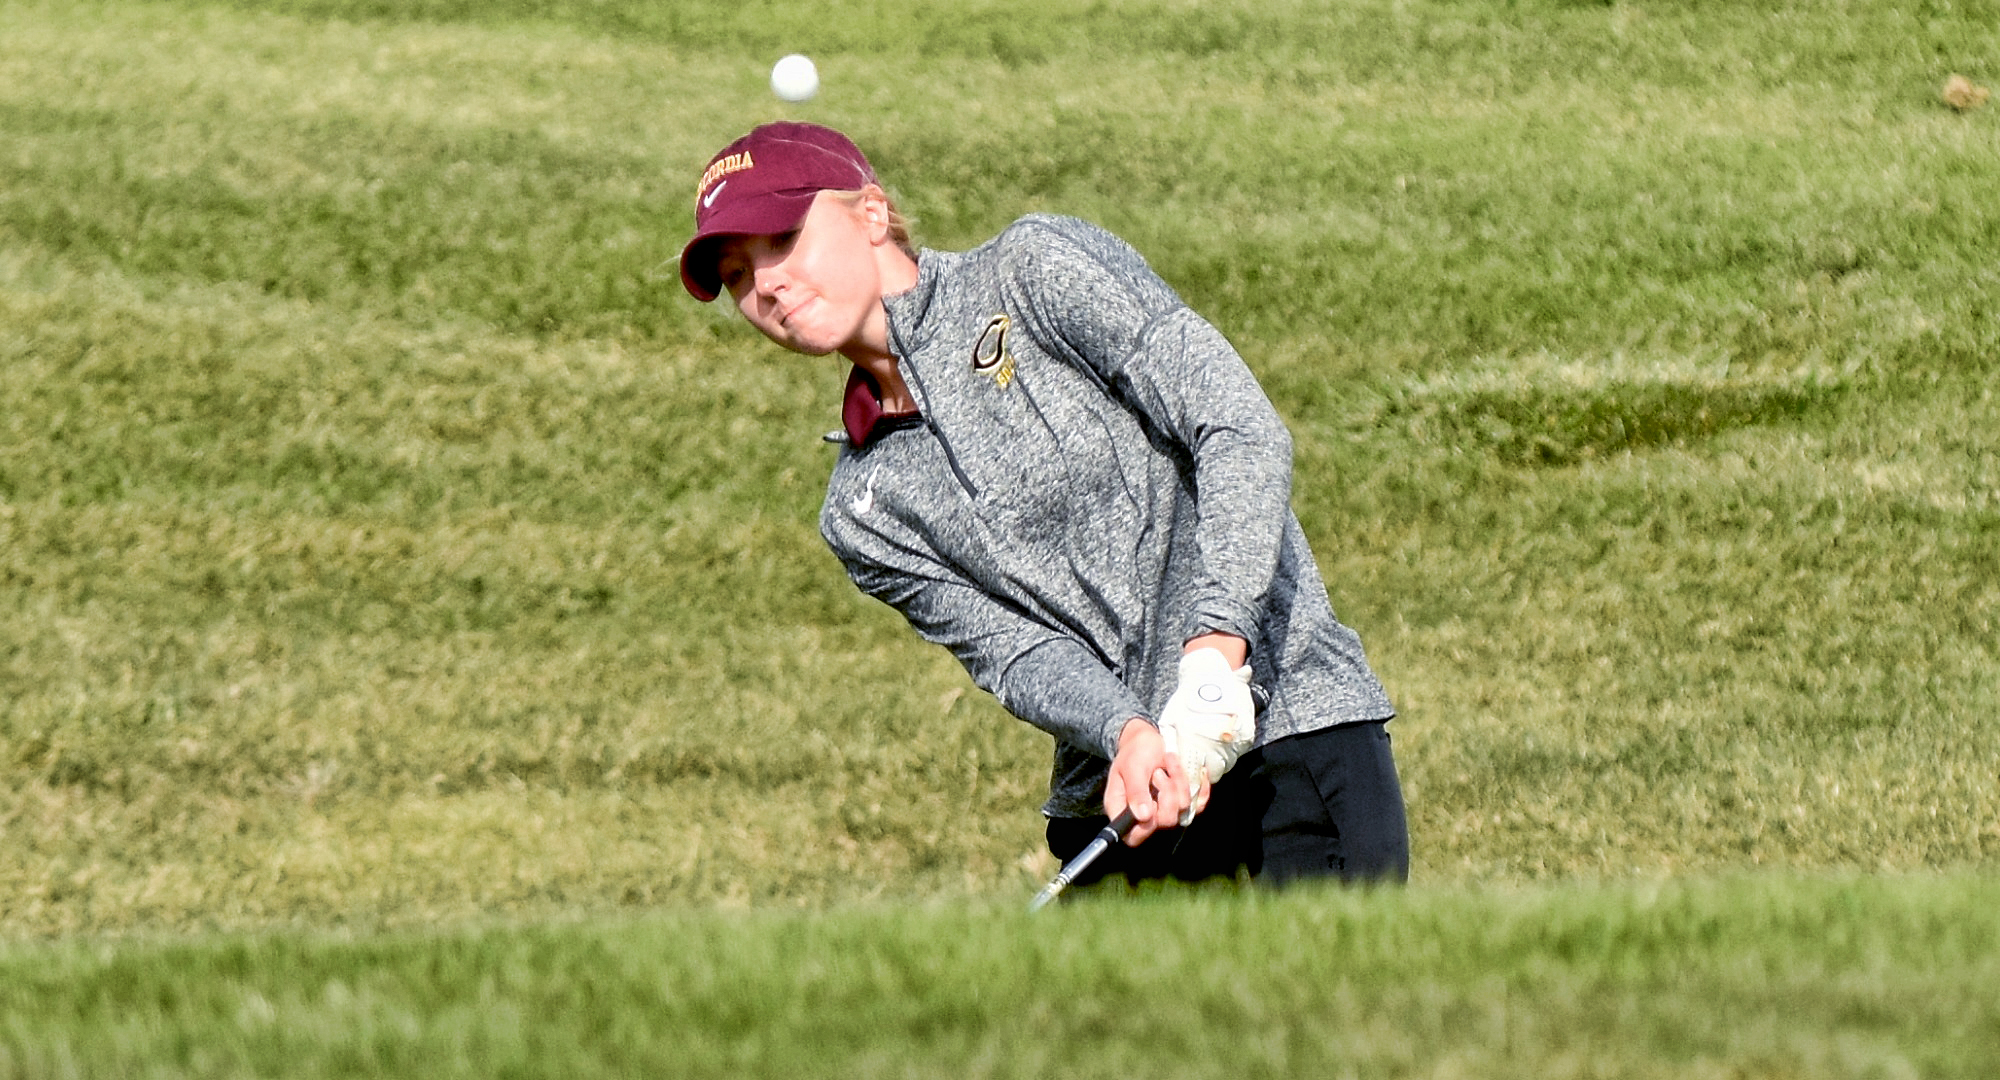 Katie Froemke improved by 12 strokes from Day 1 to Day 2 and shot her lowest round of the year on Sunday at the St. Kate's Invite.